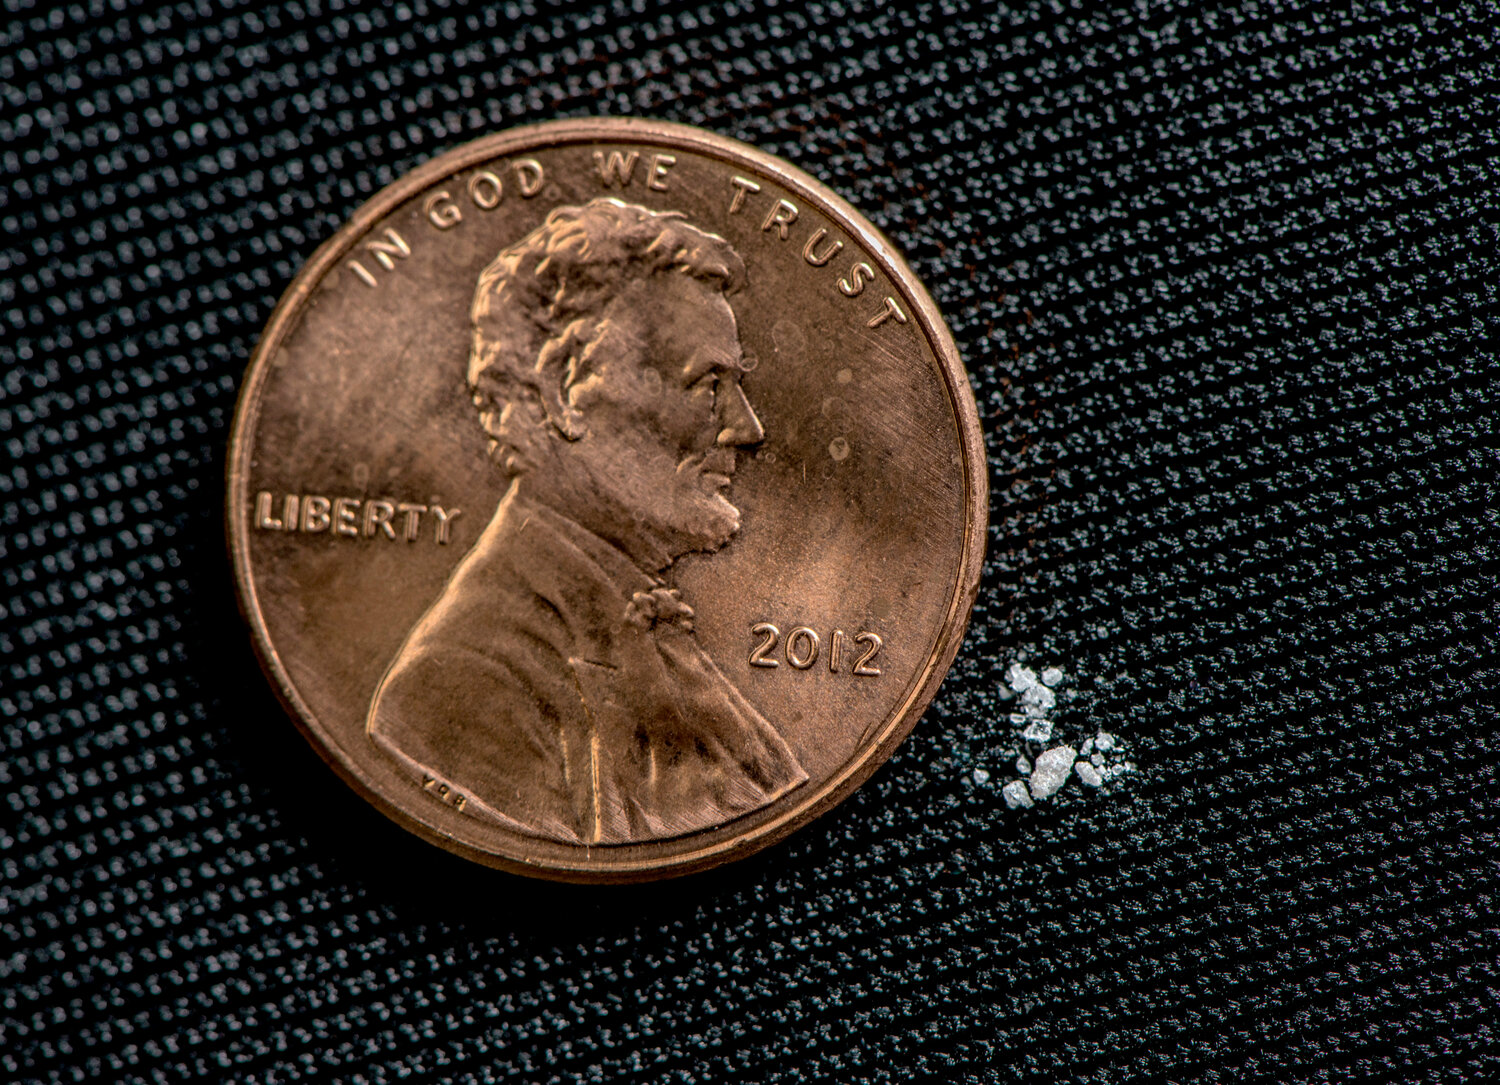 This tiny amount of fentanyl next to the penny is a lethal dose.